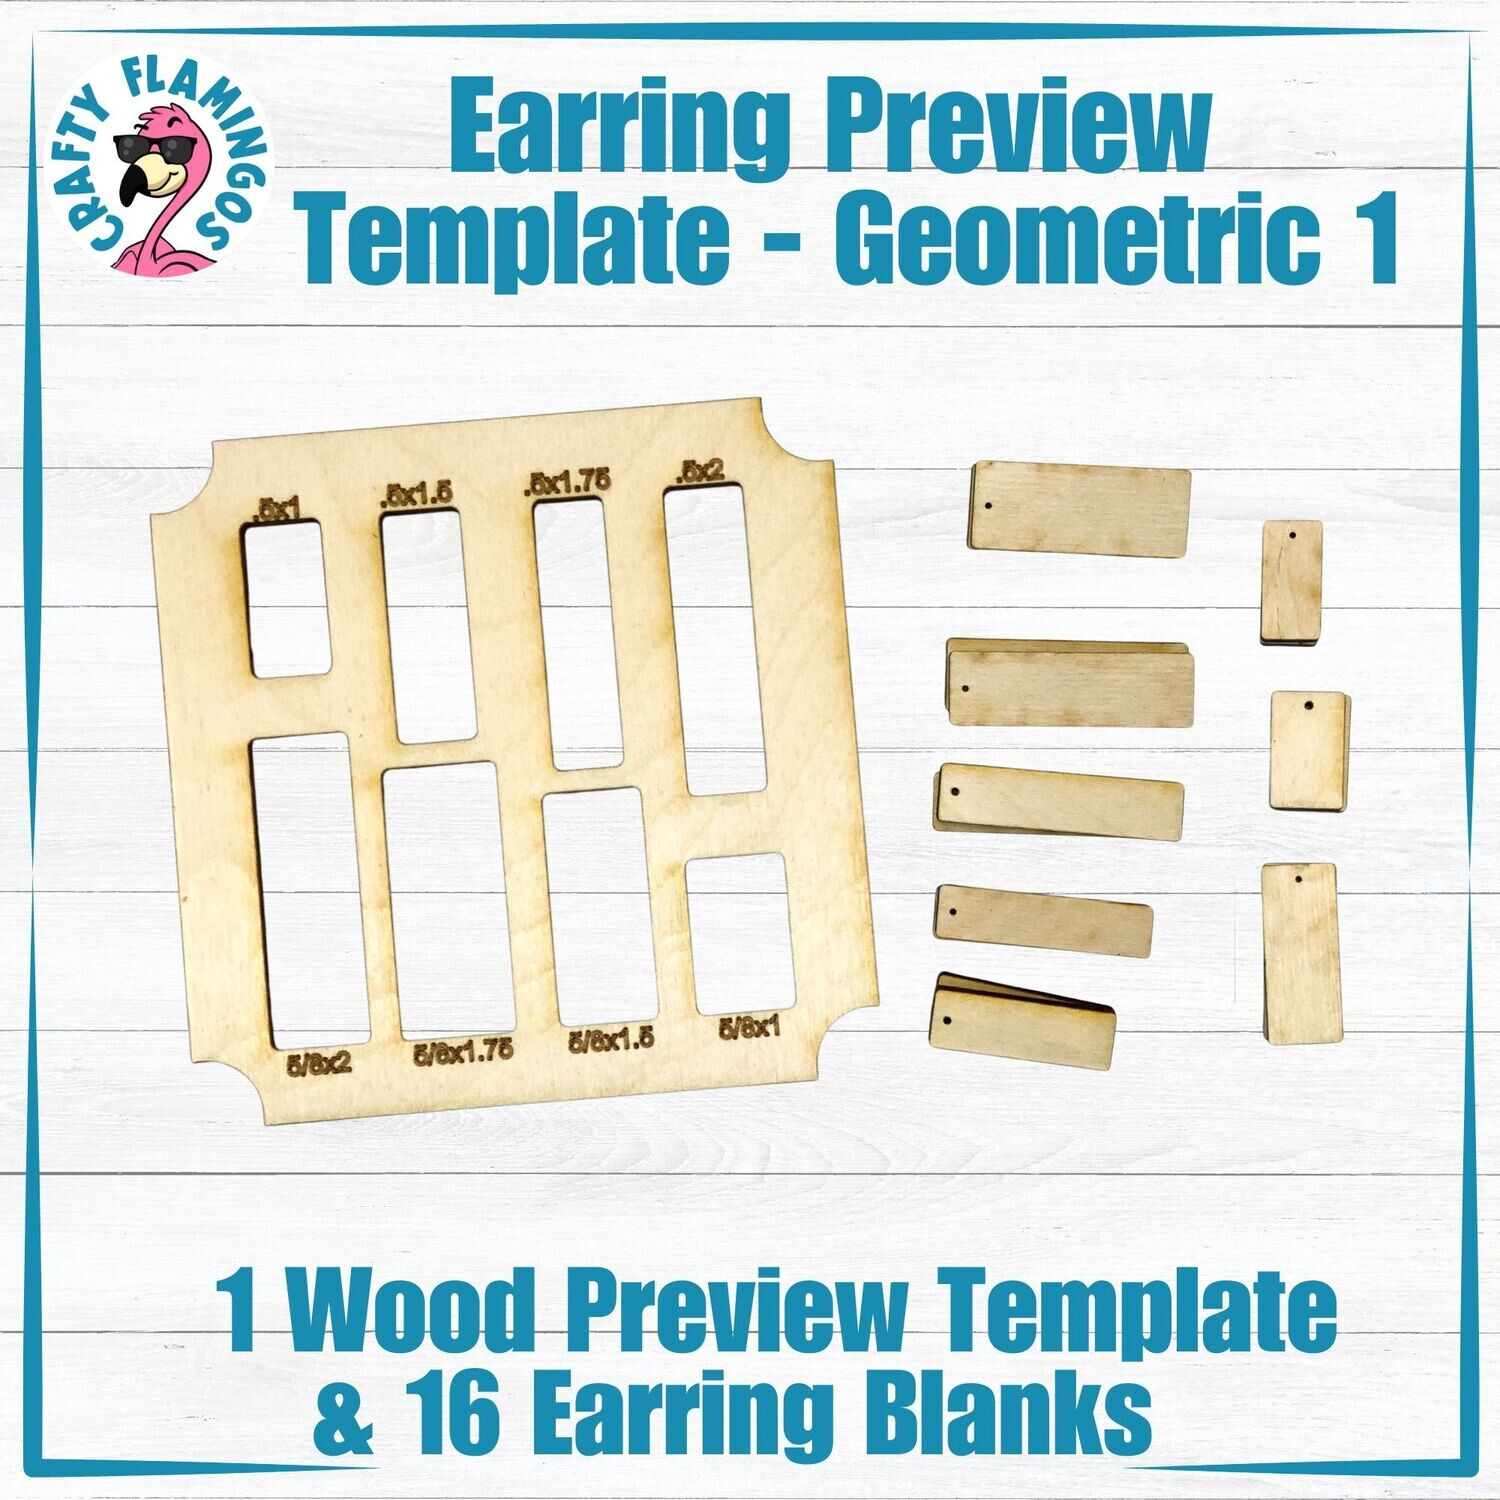 Earring Preview Template - Geometric 1 Rectangles with 16 Earring Blanks